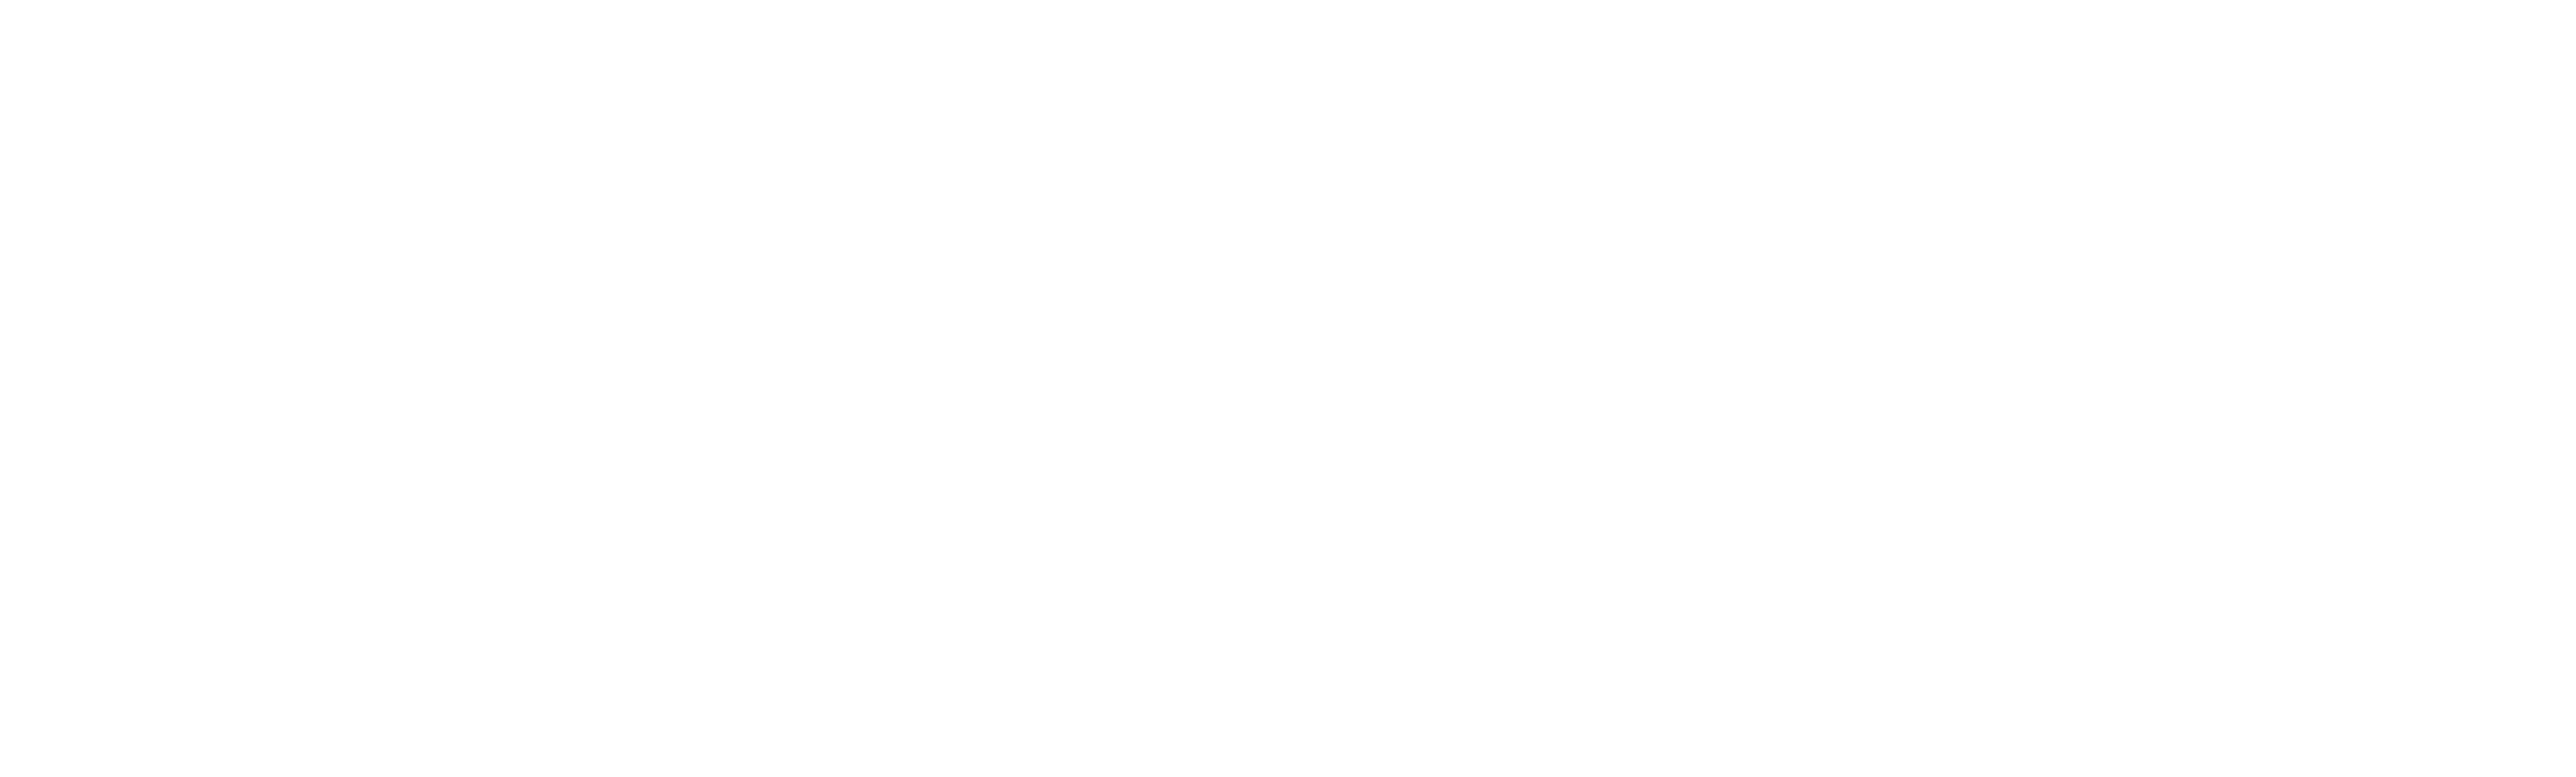 Open Targets helix logo and wordmark in white